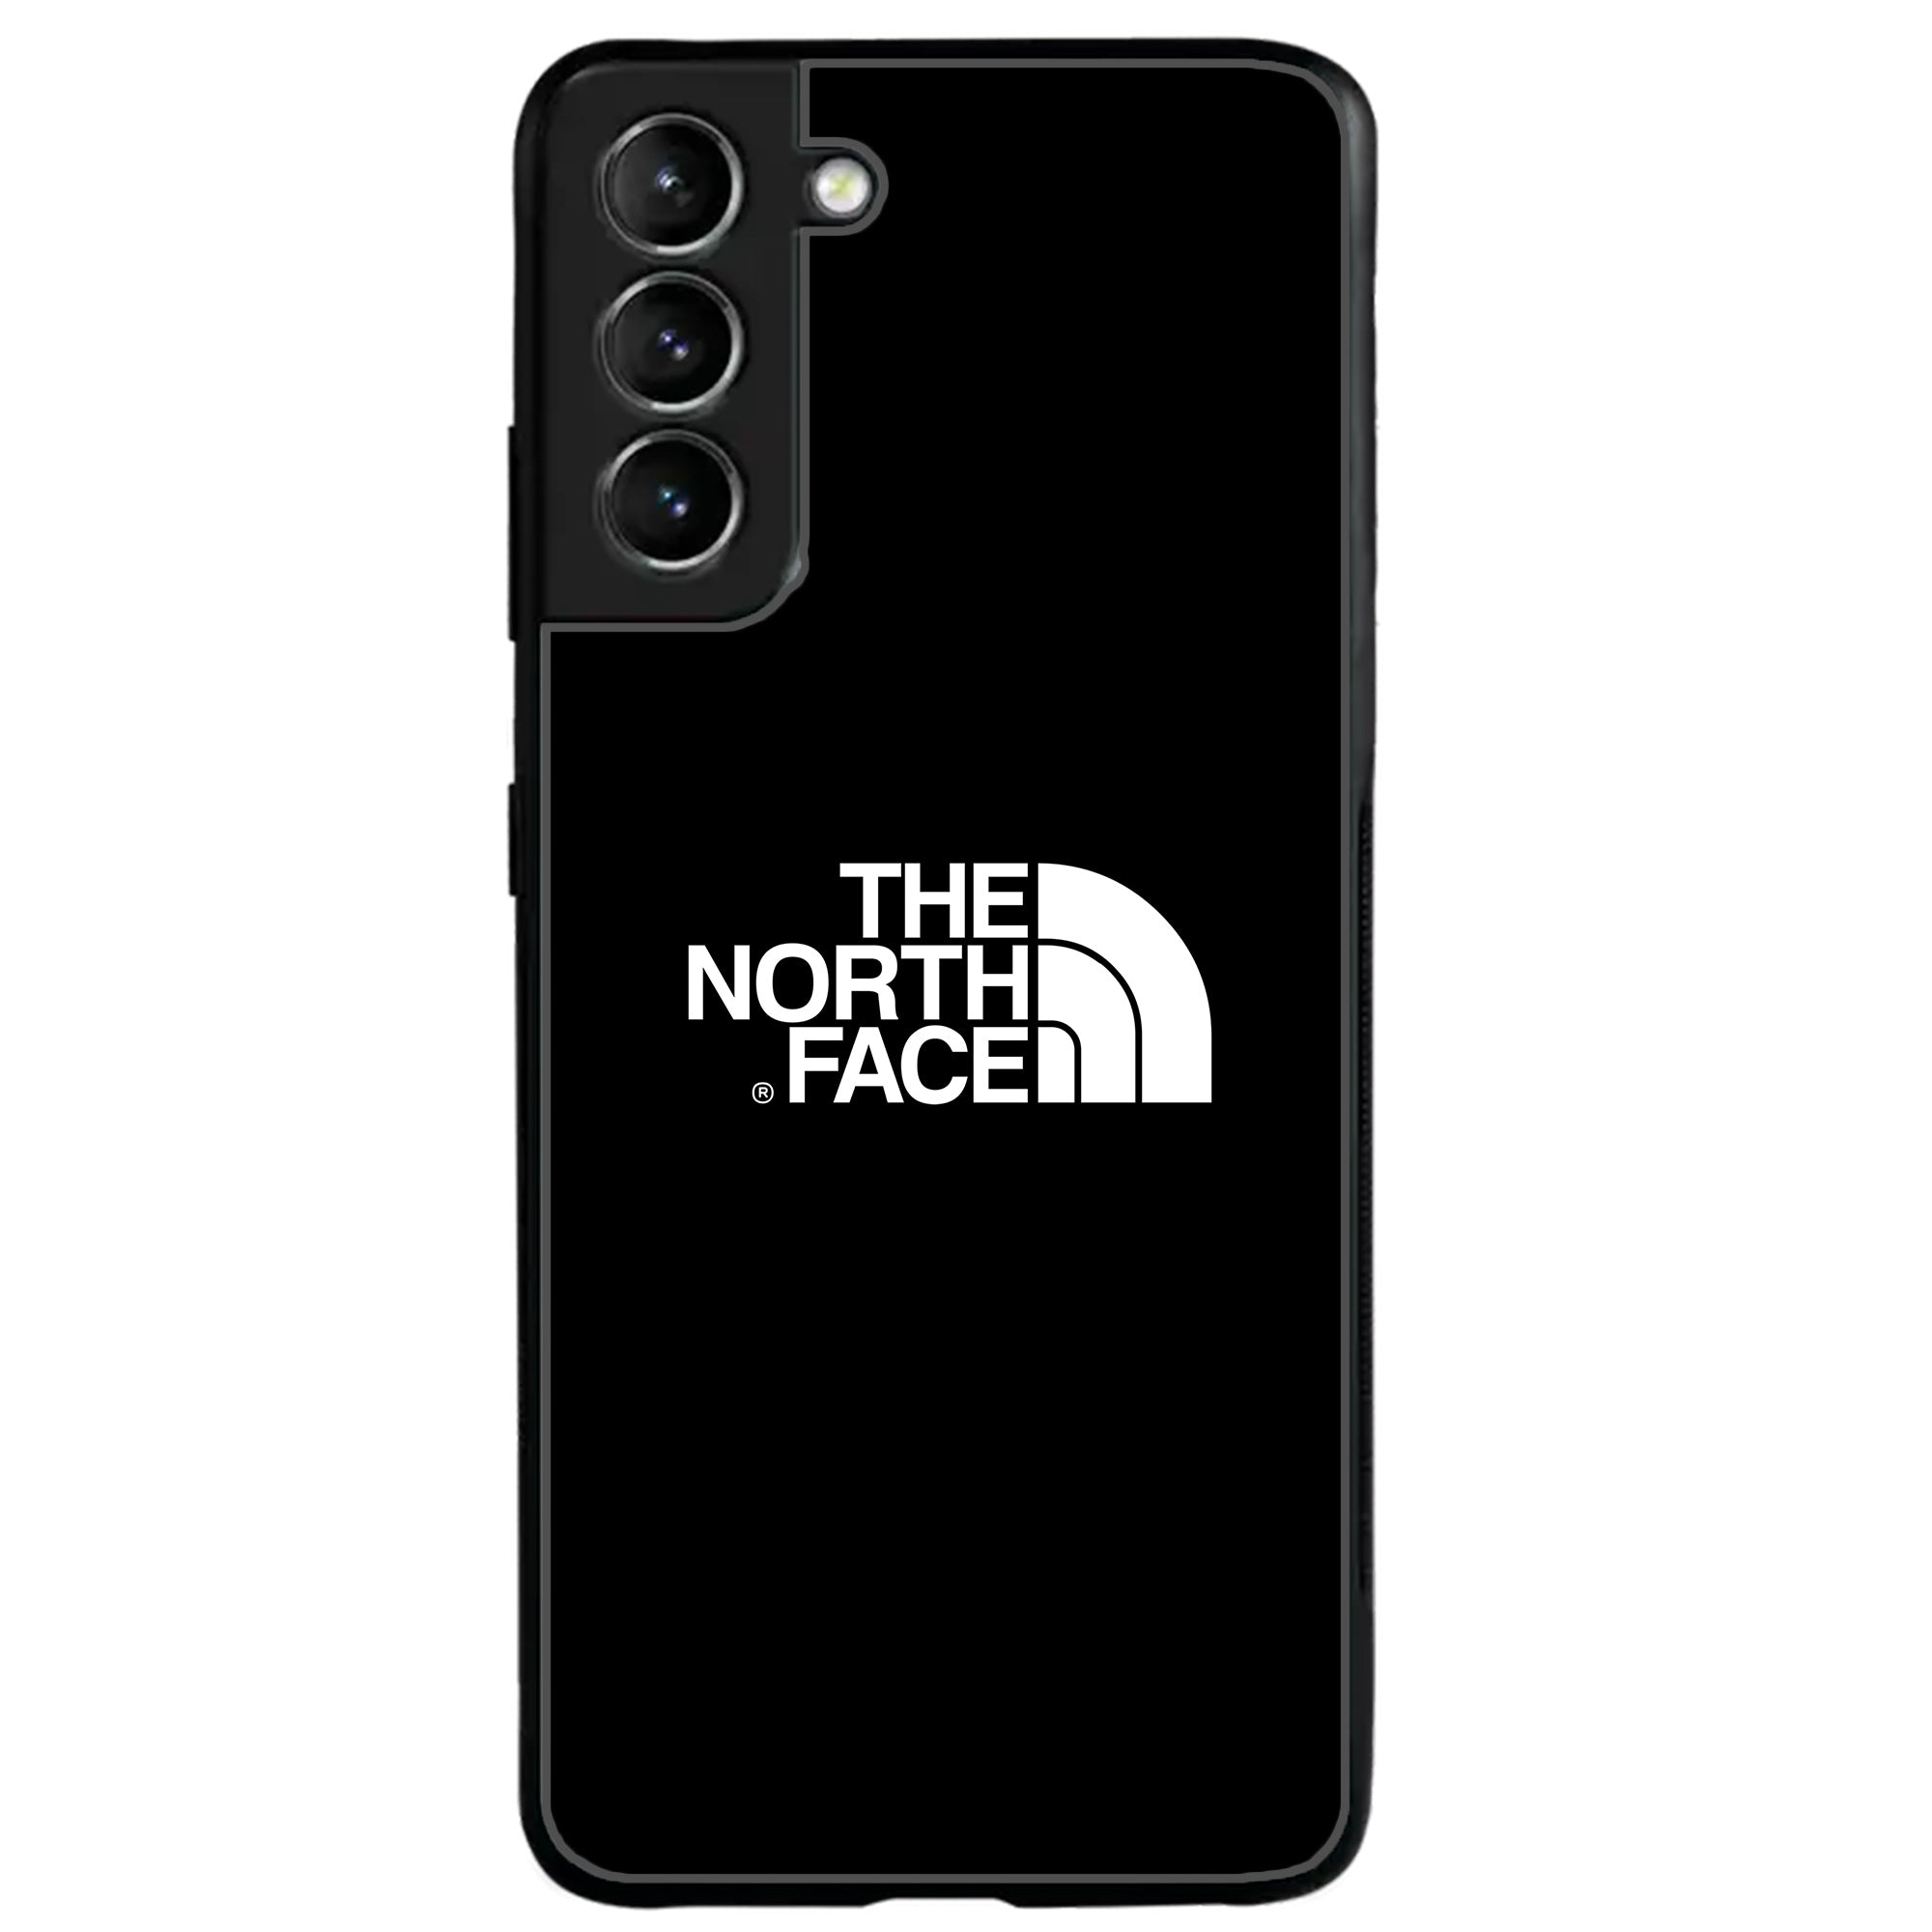 Galaxy S21 Plus - The North Face Series - Premium Printed Glass soft Bumper shock Proof Case